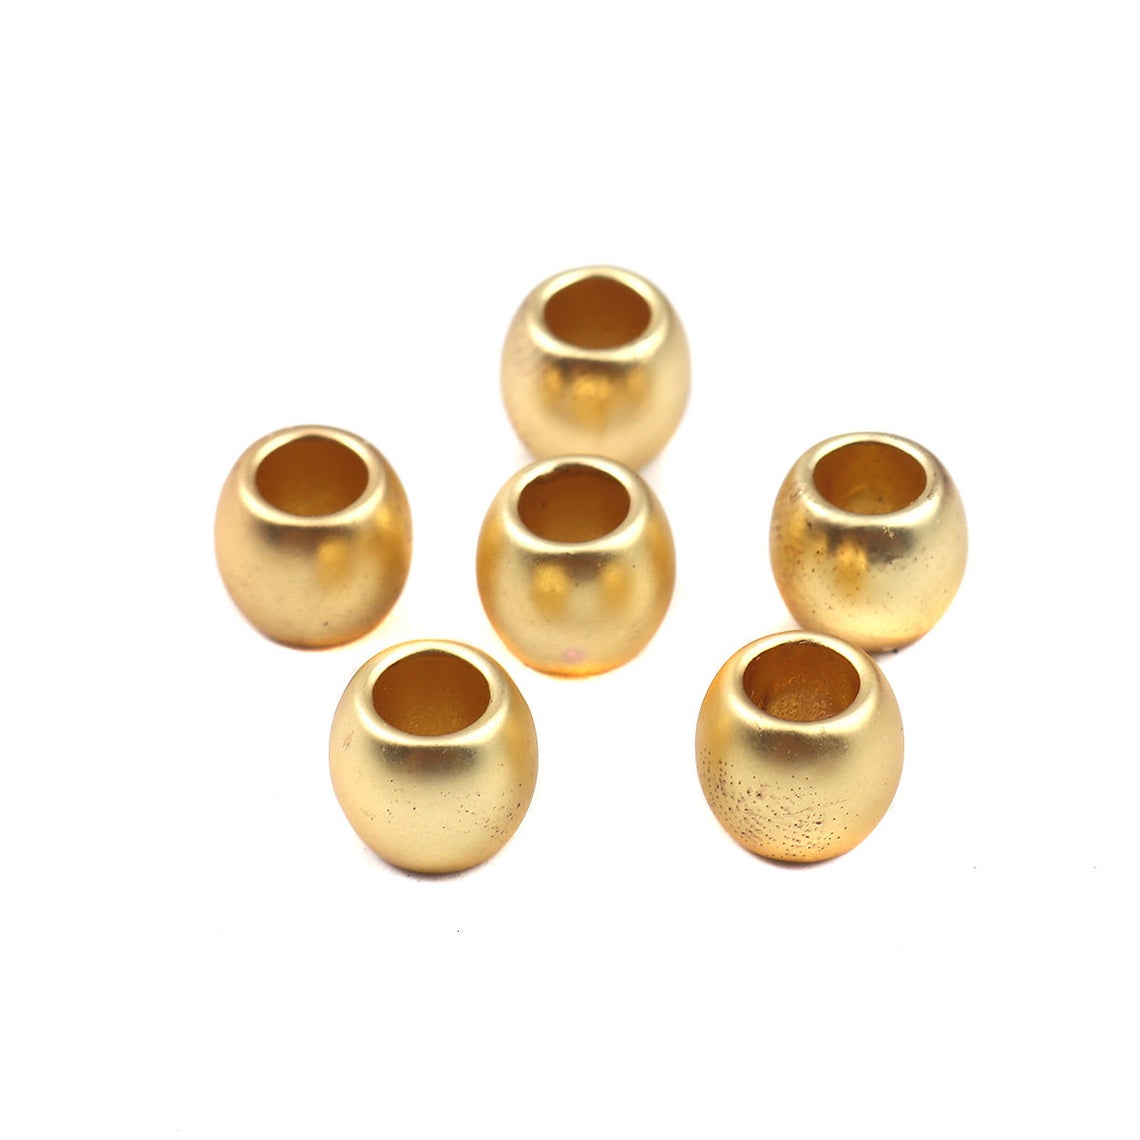 9mm Hole 10 pcs Gold Plated Smooth Drum METAL Spacer Beads 4.9mm MATTE 